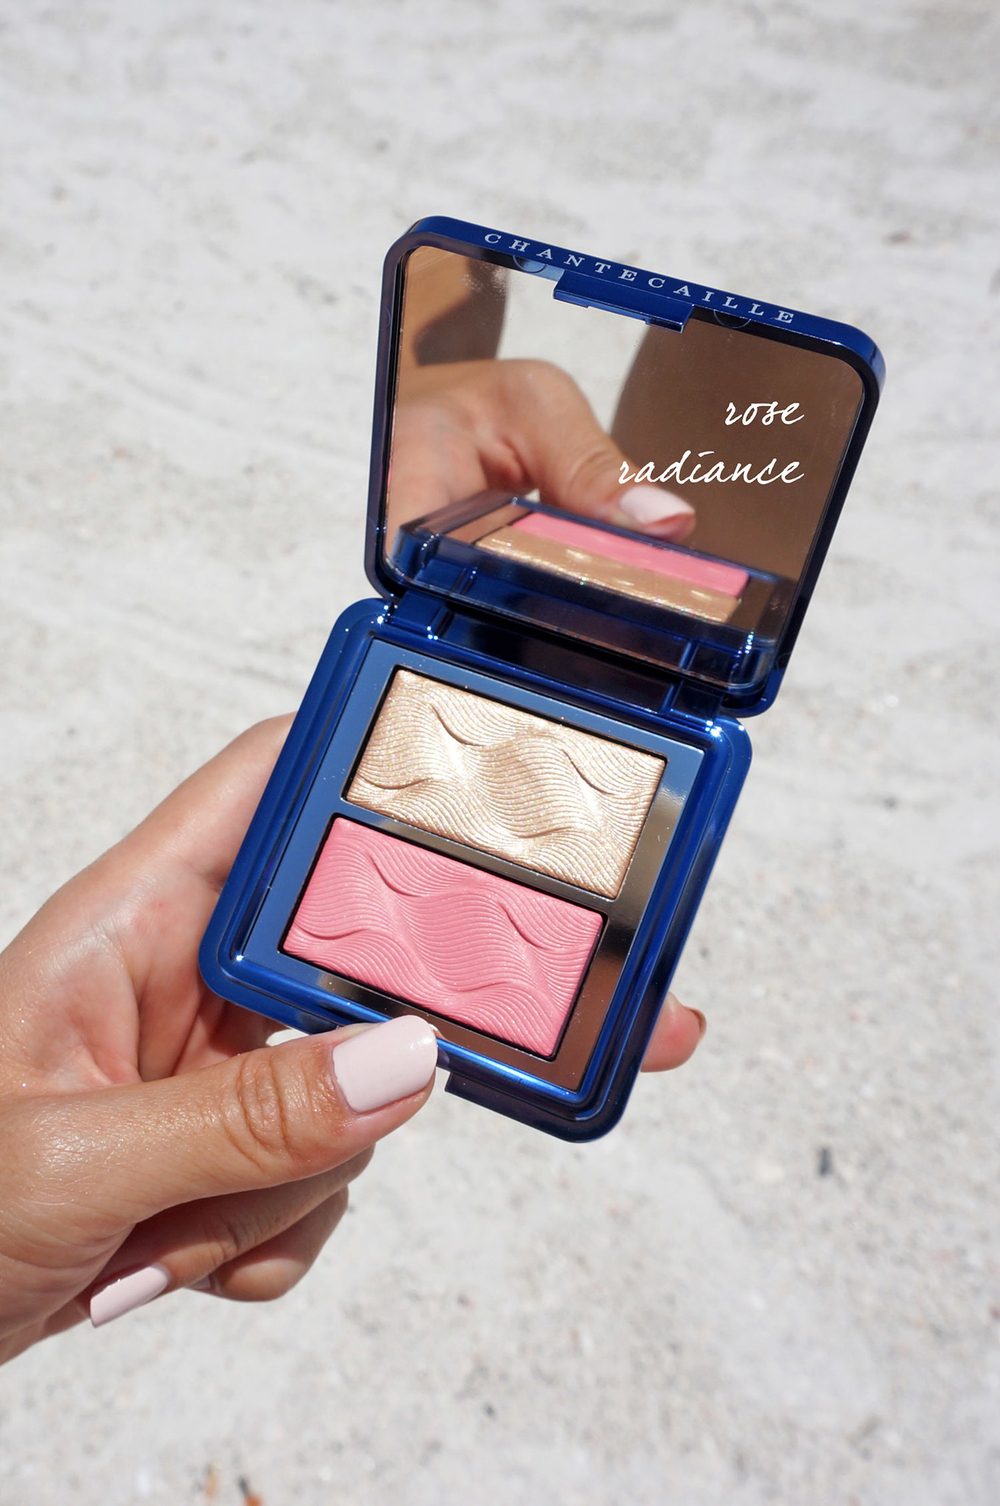 CHANTECAILLE Vibrant Oceans Radiance Chic Cheek And Highlighter Duo